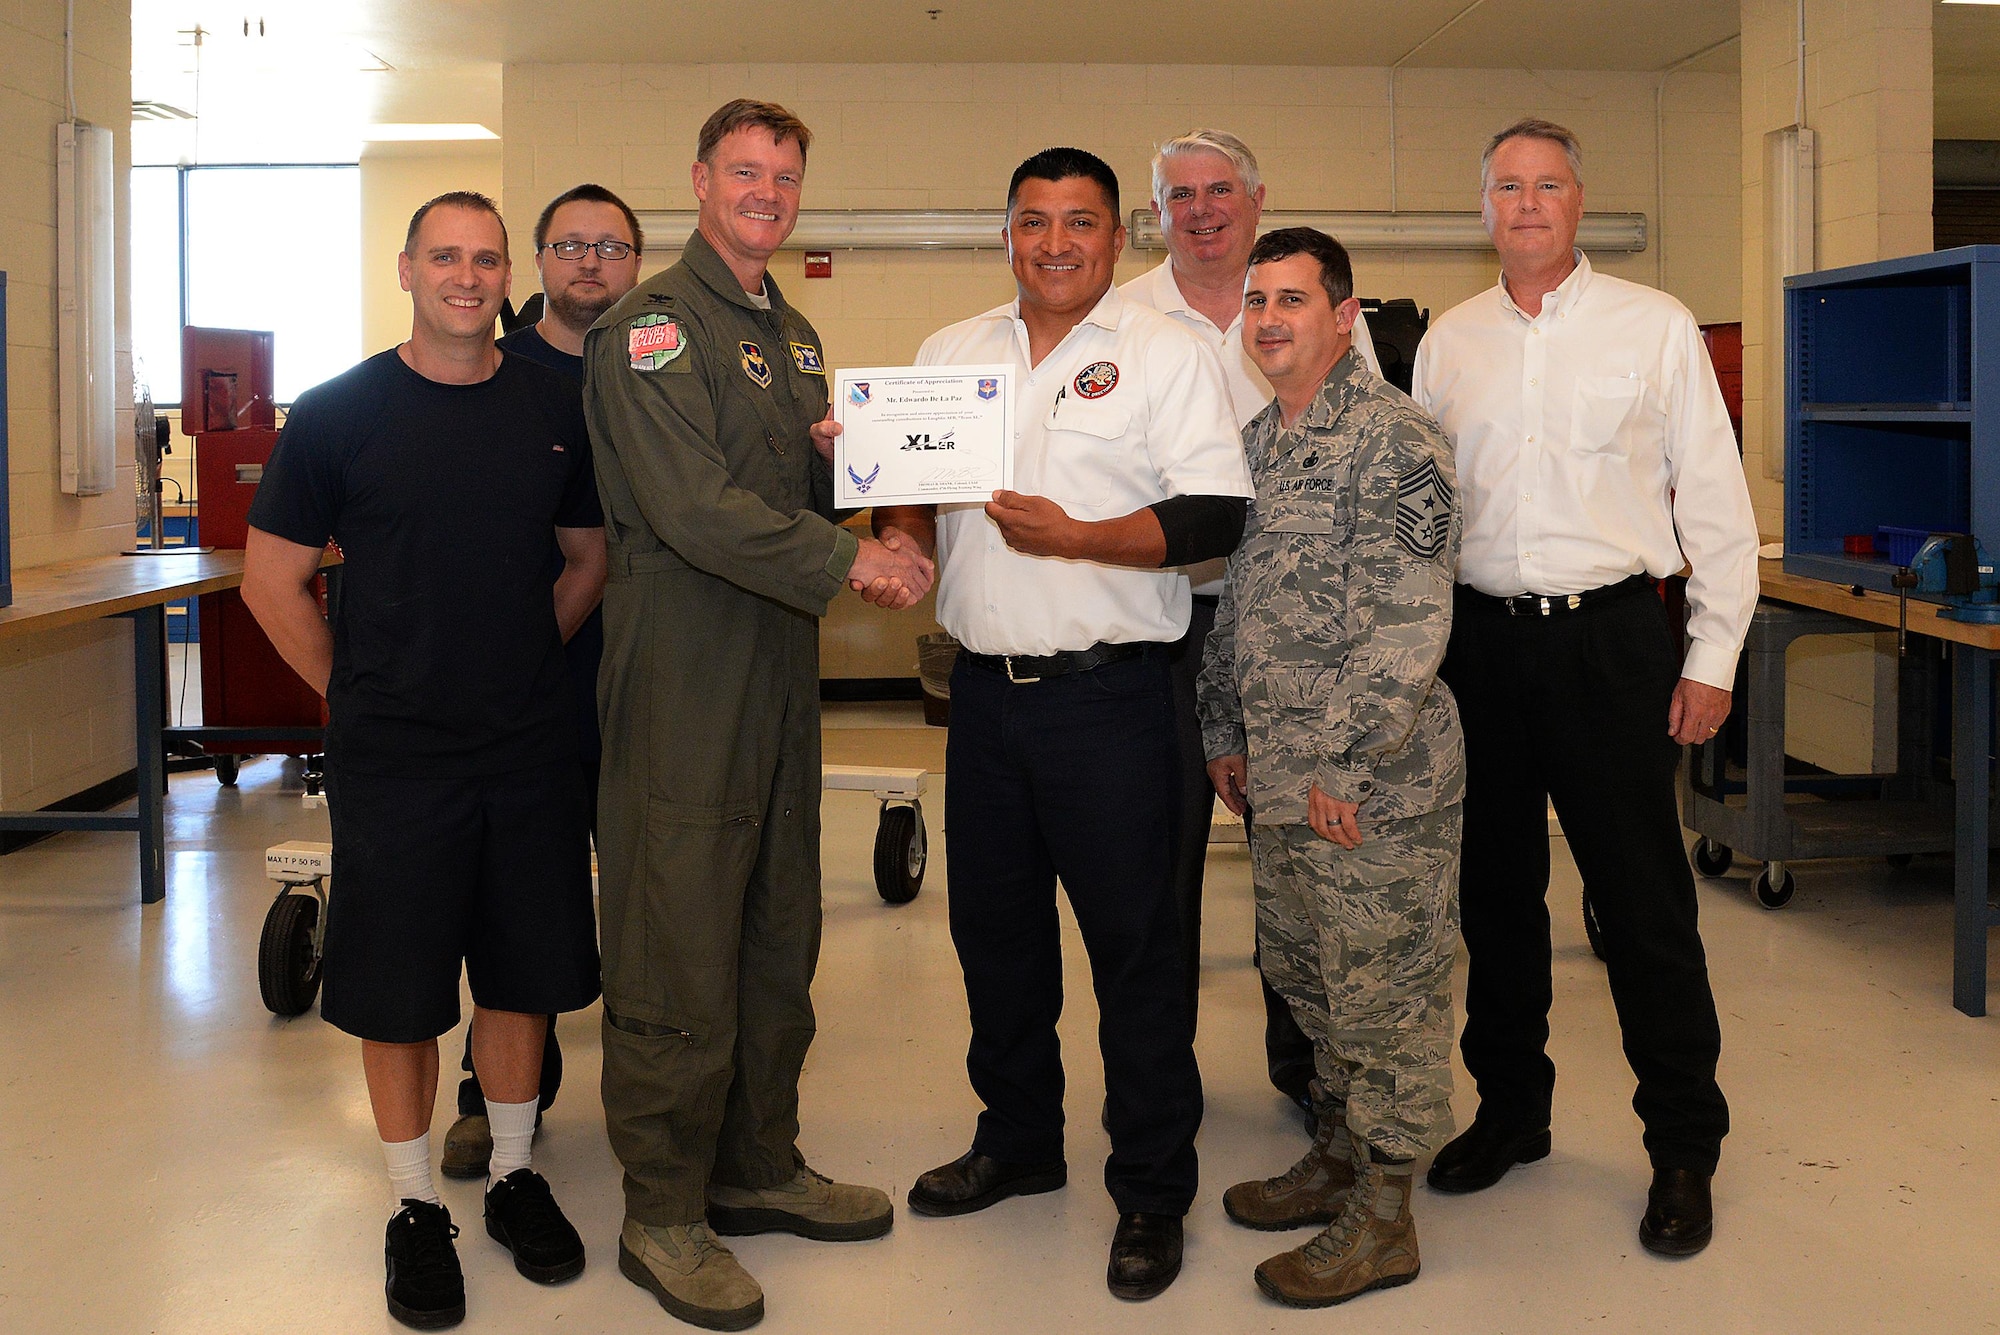 Edwardo De La Paz, 47th Maintenance Directorate aircrew egress shop supervisor (center), accepts the “XLer of the Week” award from Col. Thomas Shank, 47th Flying Training Wing commander (left), and Chief Master Sgt. George Richey, 47th FTW command chief (right), on Laughlin Air Force Base, Texas, April 4, 2017. The XLer is a weekly award chosen by wing leadership and is presented to those who consistently make outstanding contributions to their unit and Laughlin. (U.S. Air Force photo/Airman 1st Class Daniel Hambor)